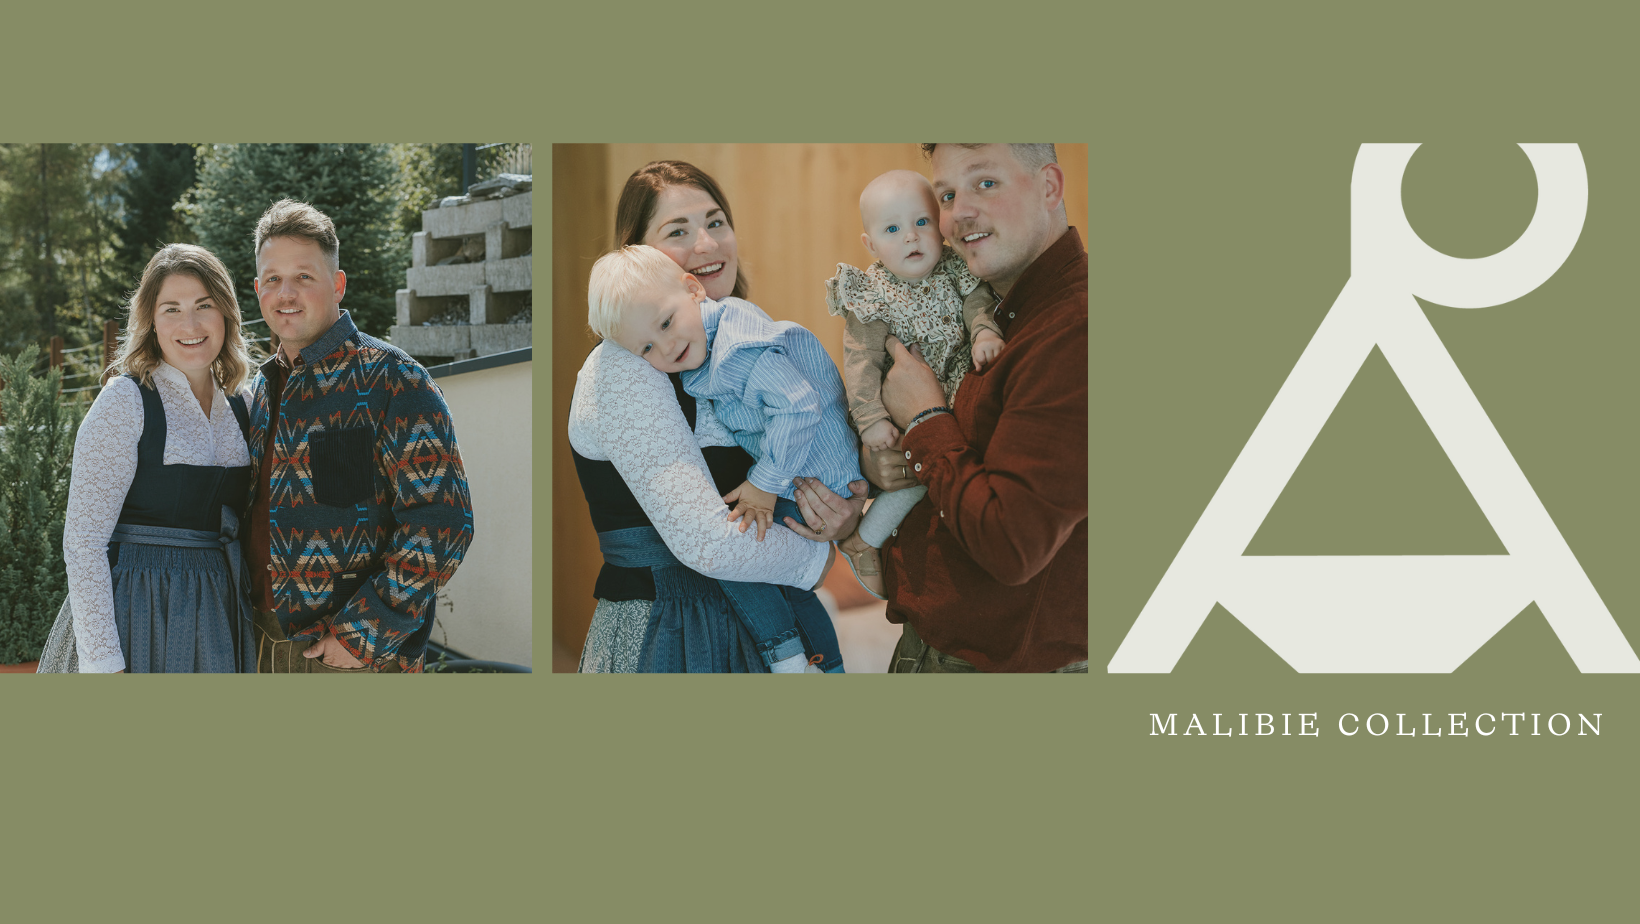 malibie collection - A family thing.